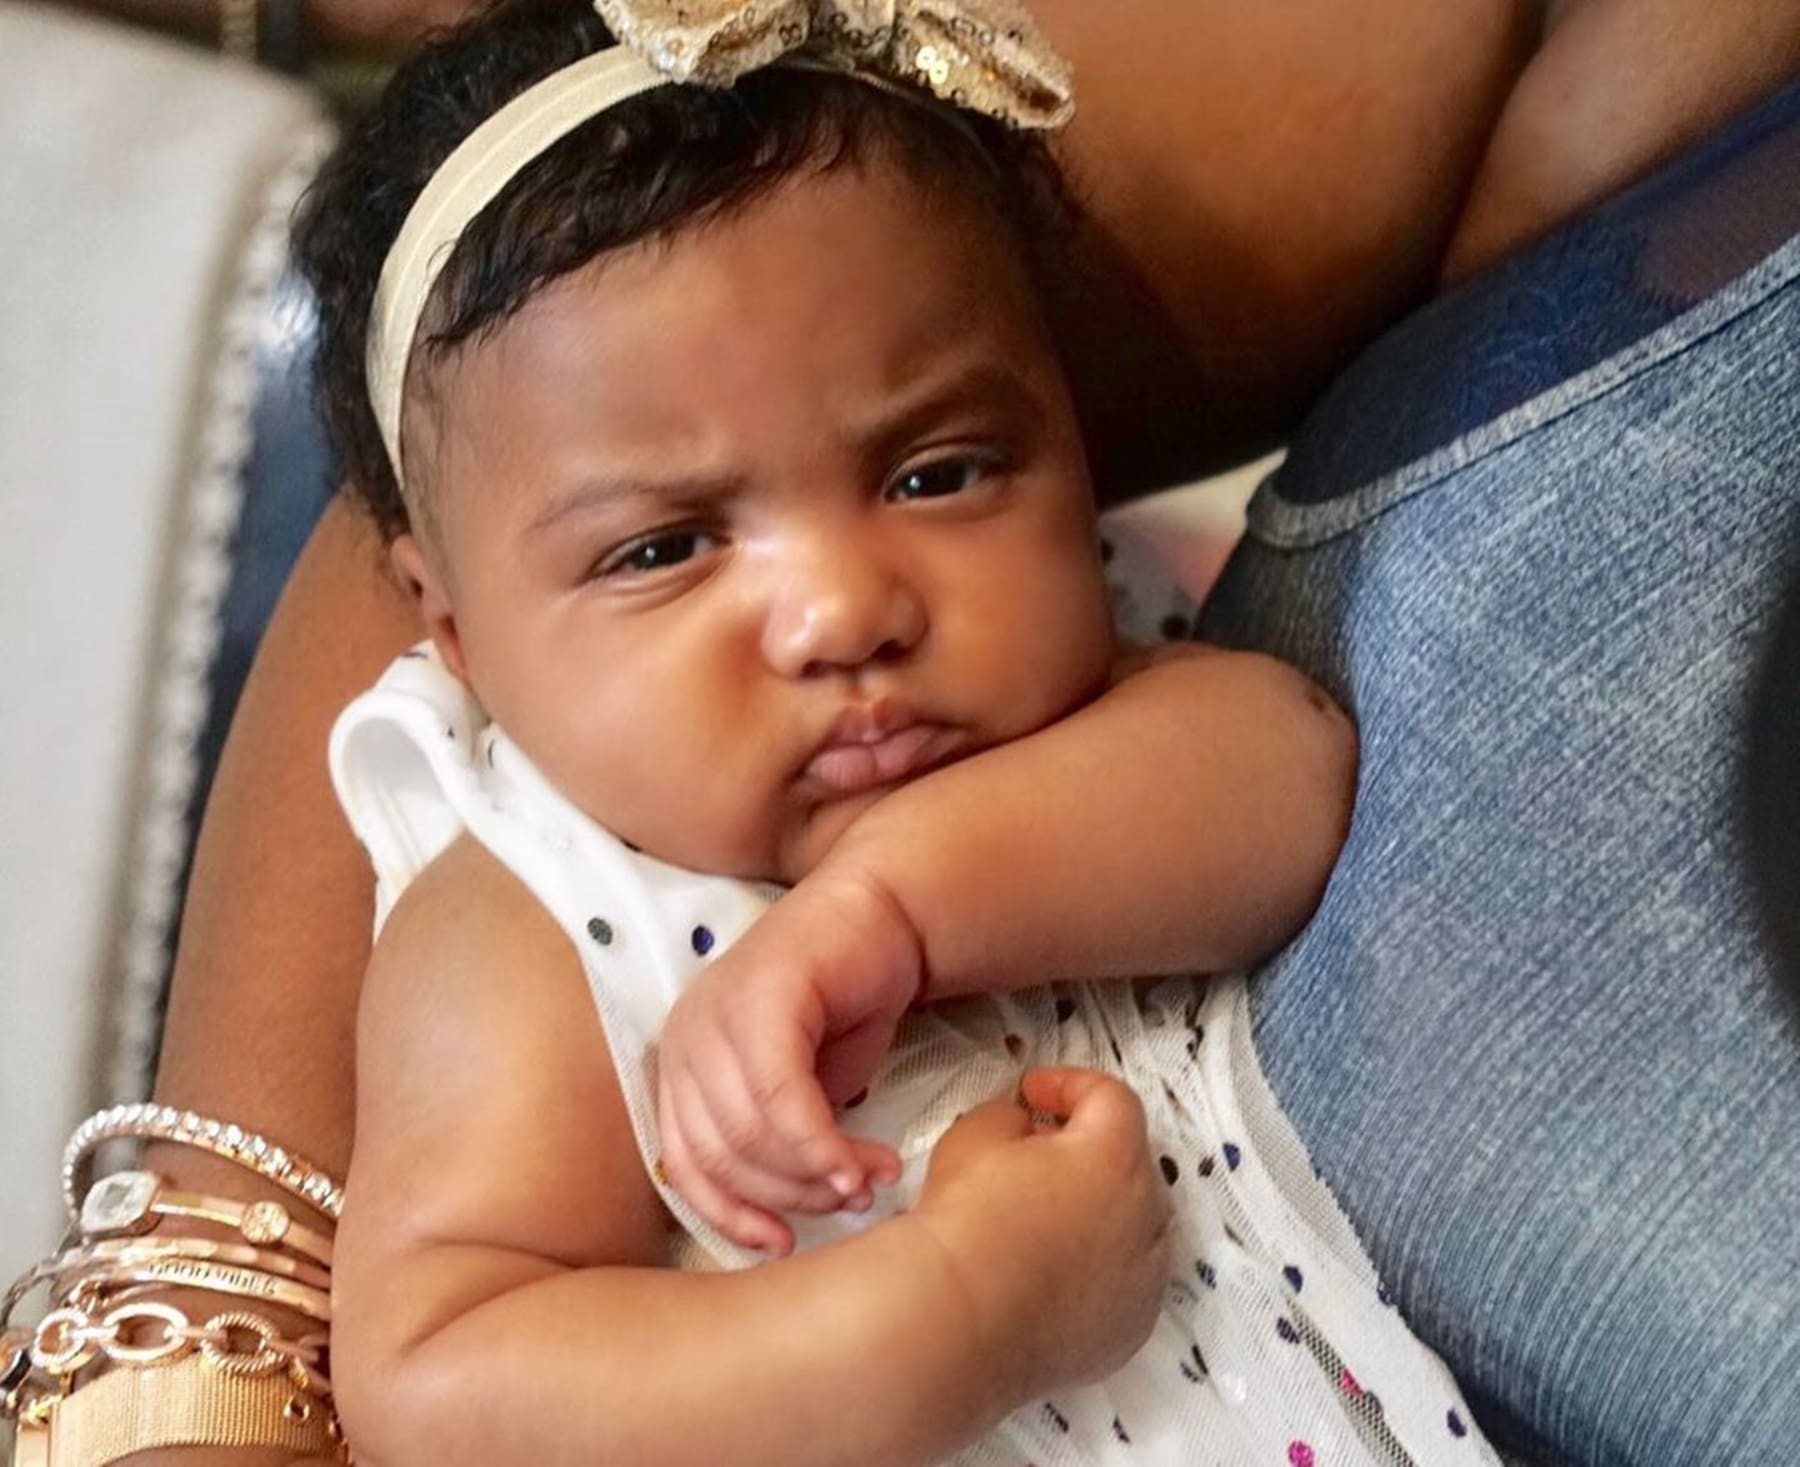 Porsha Williams' Daughter, Pilar Jhena Is Twinning With Her Grandma - See This Gorgeous Pic